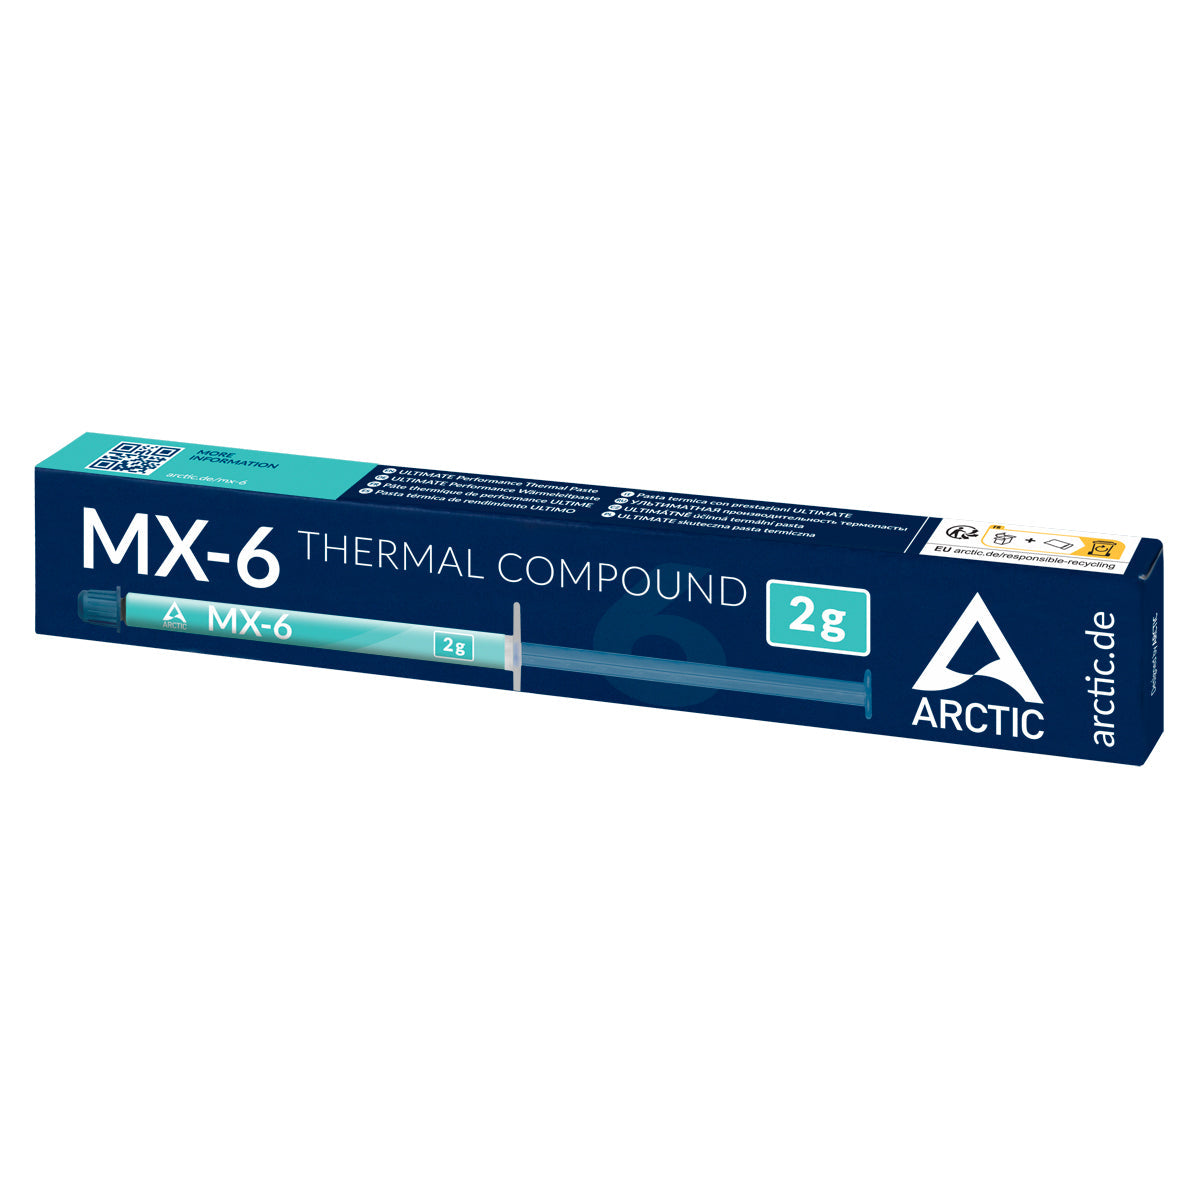 Arctic MX-6 (2g) | Thermal Compound